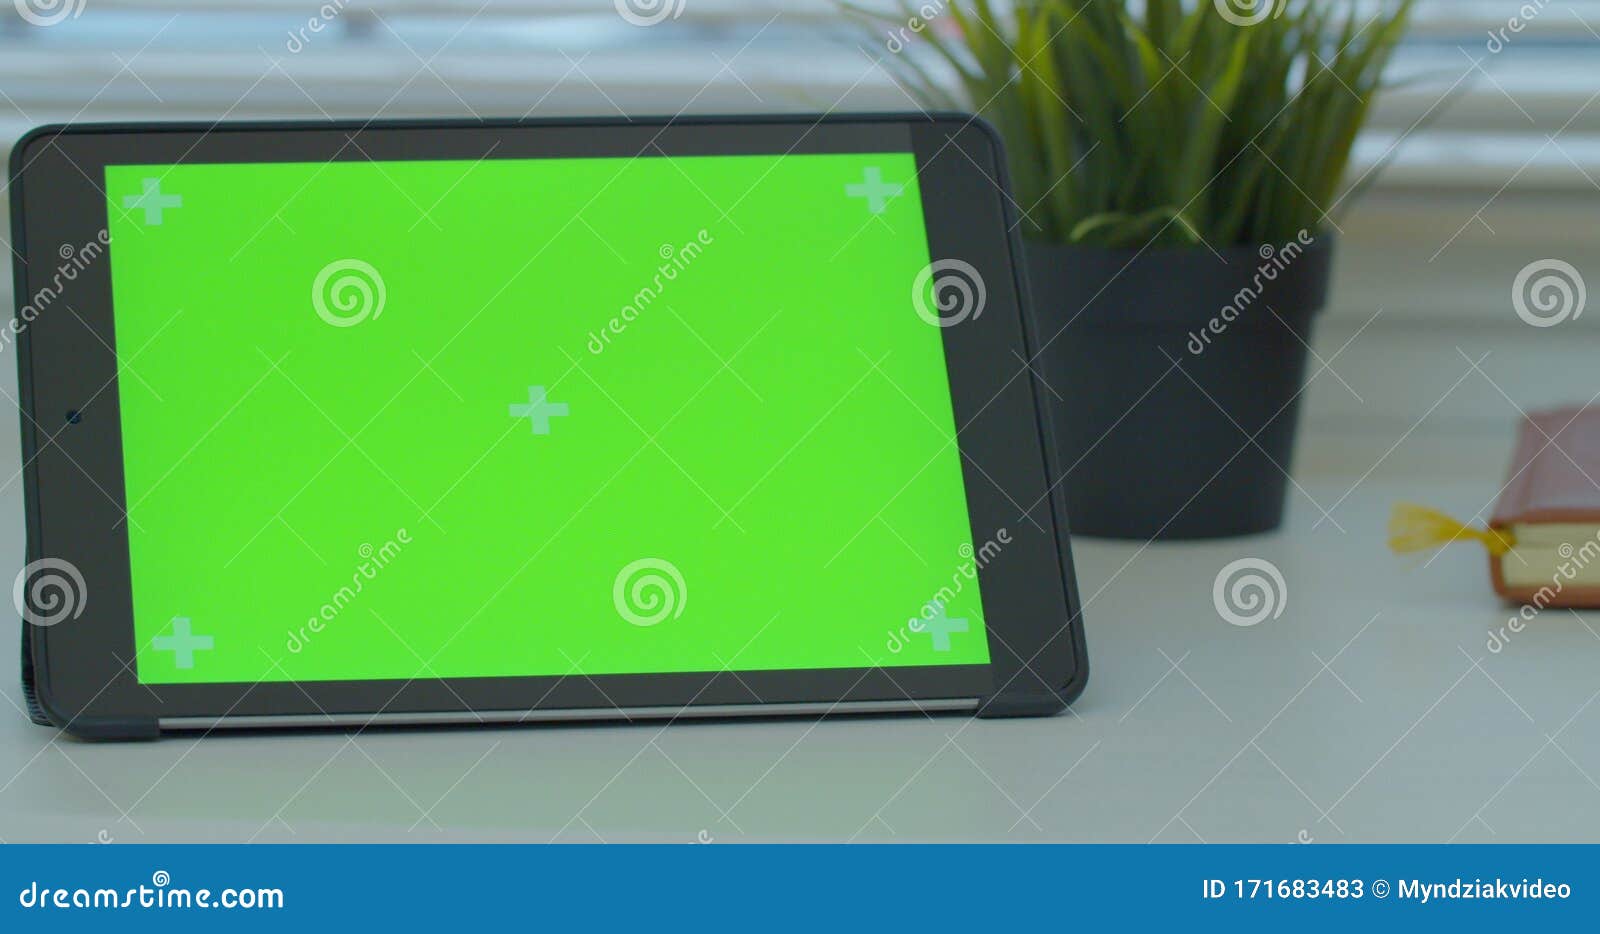 black tabletpc on a desk with green screen and book. close up 4k footage.